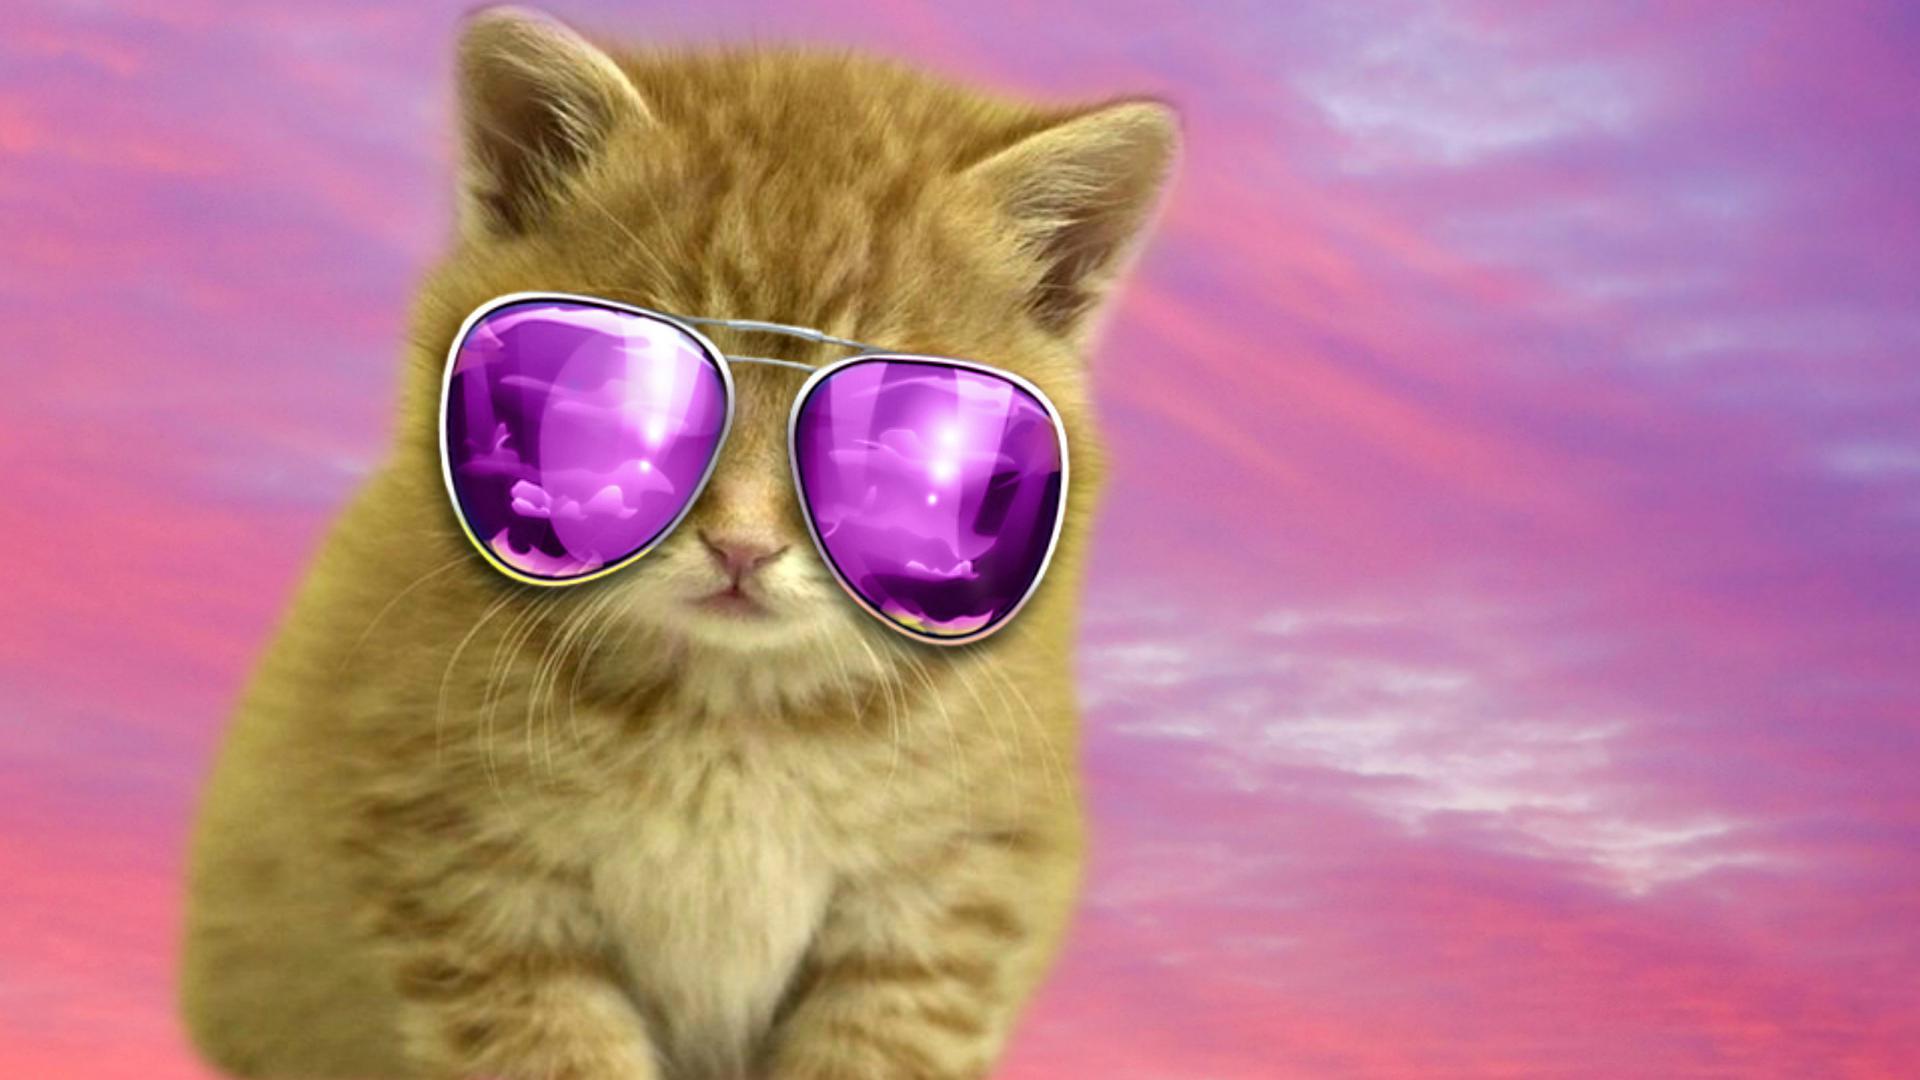 Cool cat background